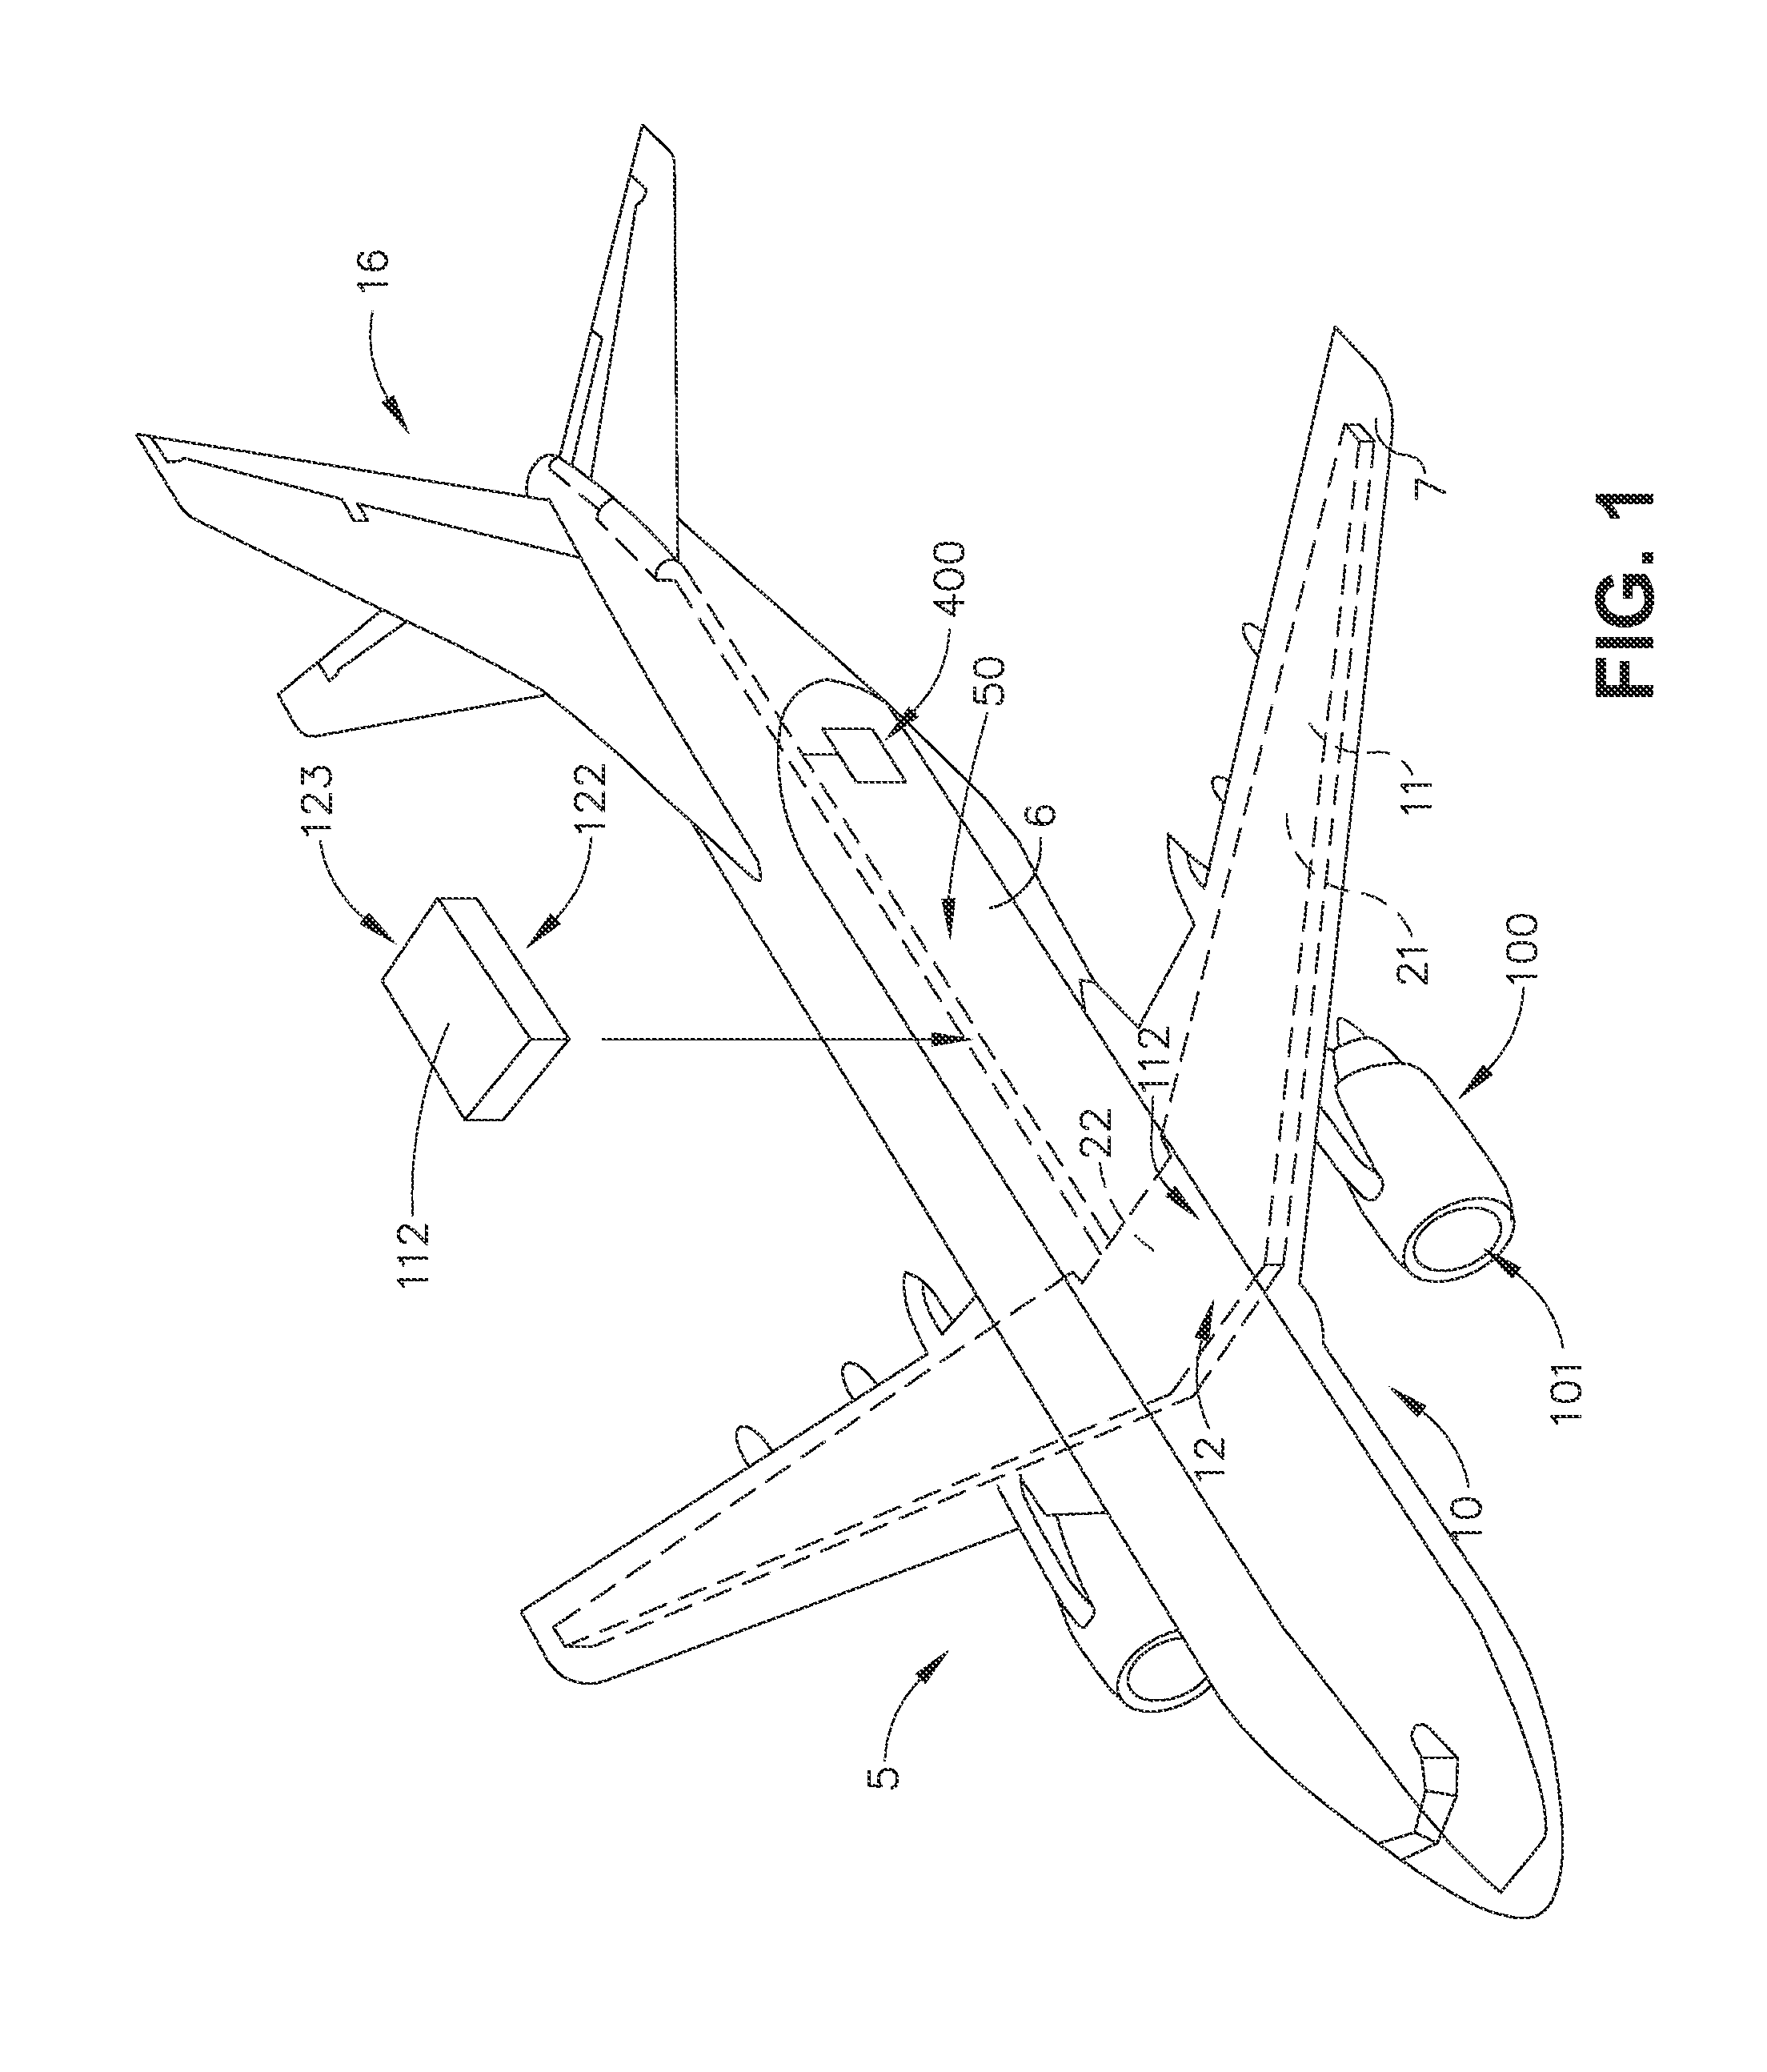 Cryogenic fuel compositions and dual fuel aircraft system